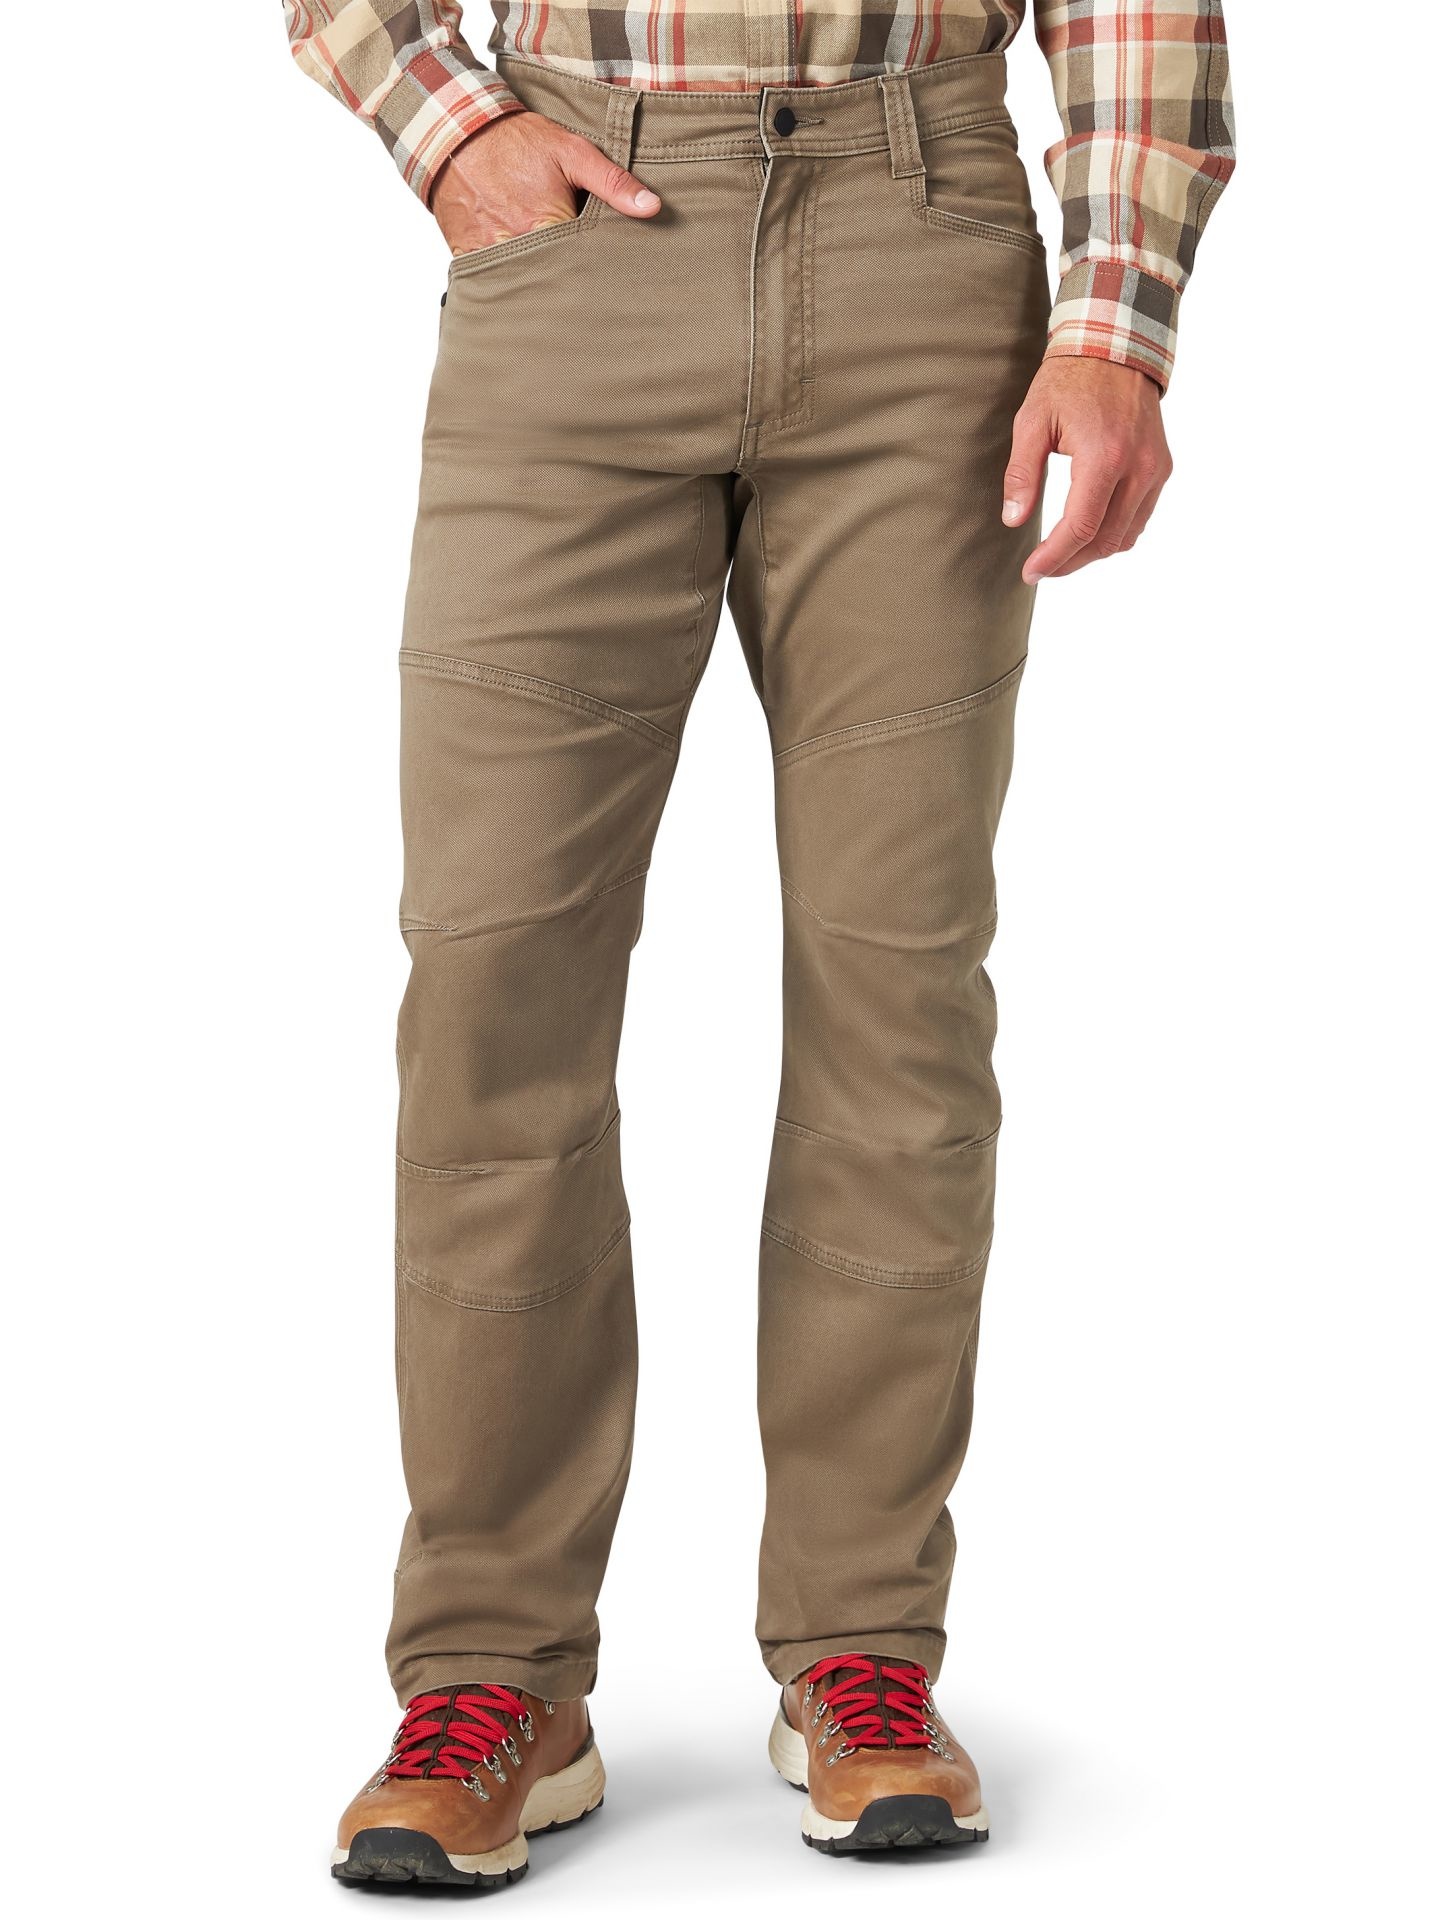 Wrangler Outdoor Series Relaxed Fit Pants | lupon.gov.ph